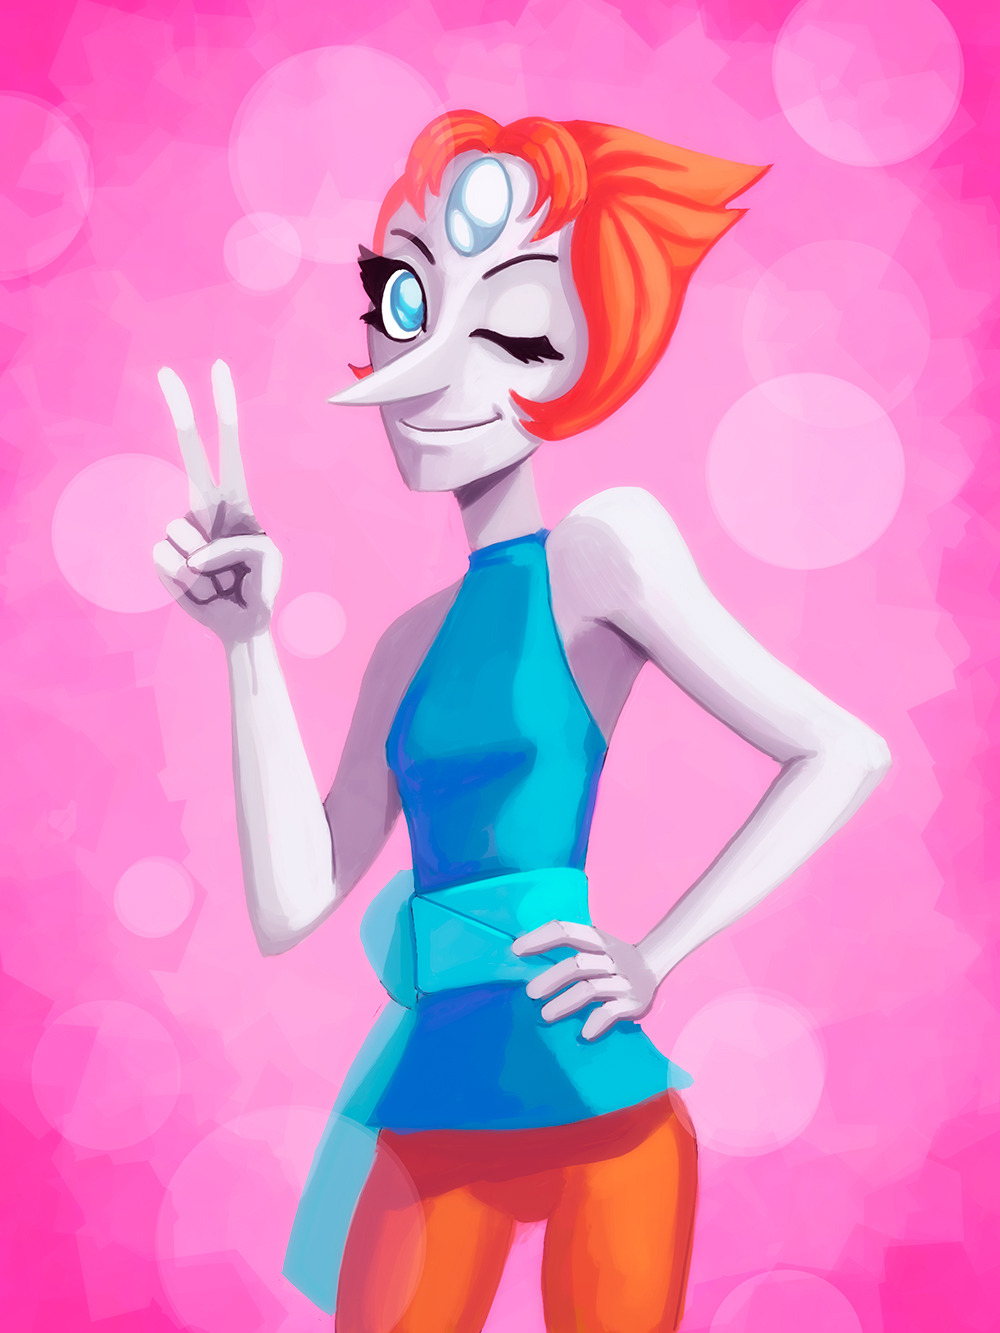 Pearl is such an anime.